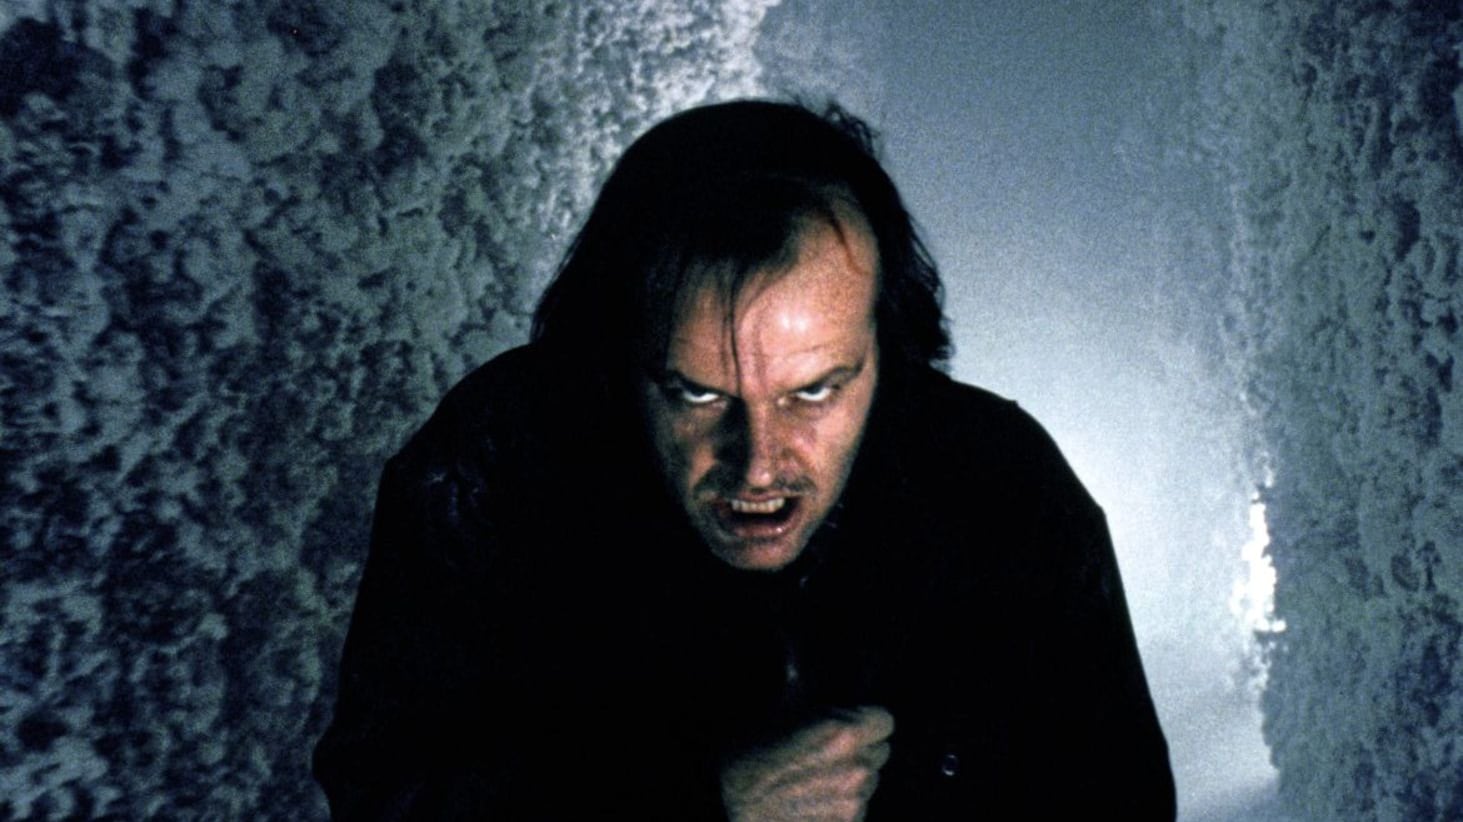 Jack Nicholson as Jack Torrance in classic Stephen King adaptation The Shining 